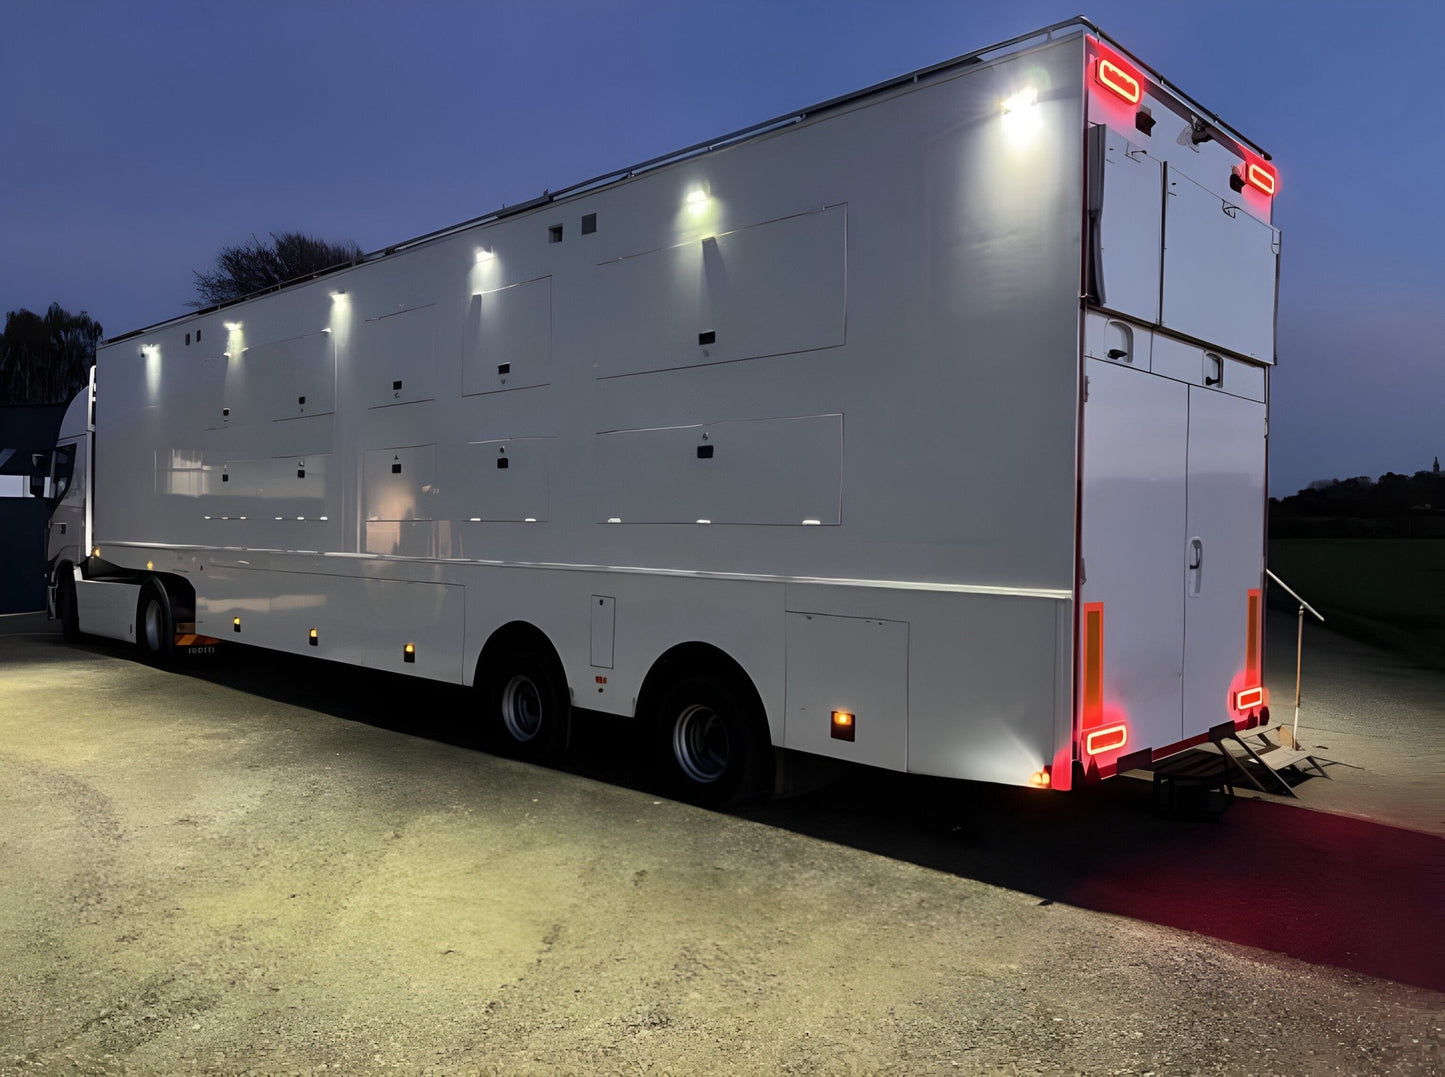 Complete OB trailer with Cameras, EVS and lenses